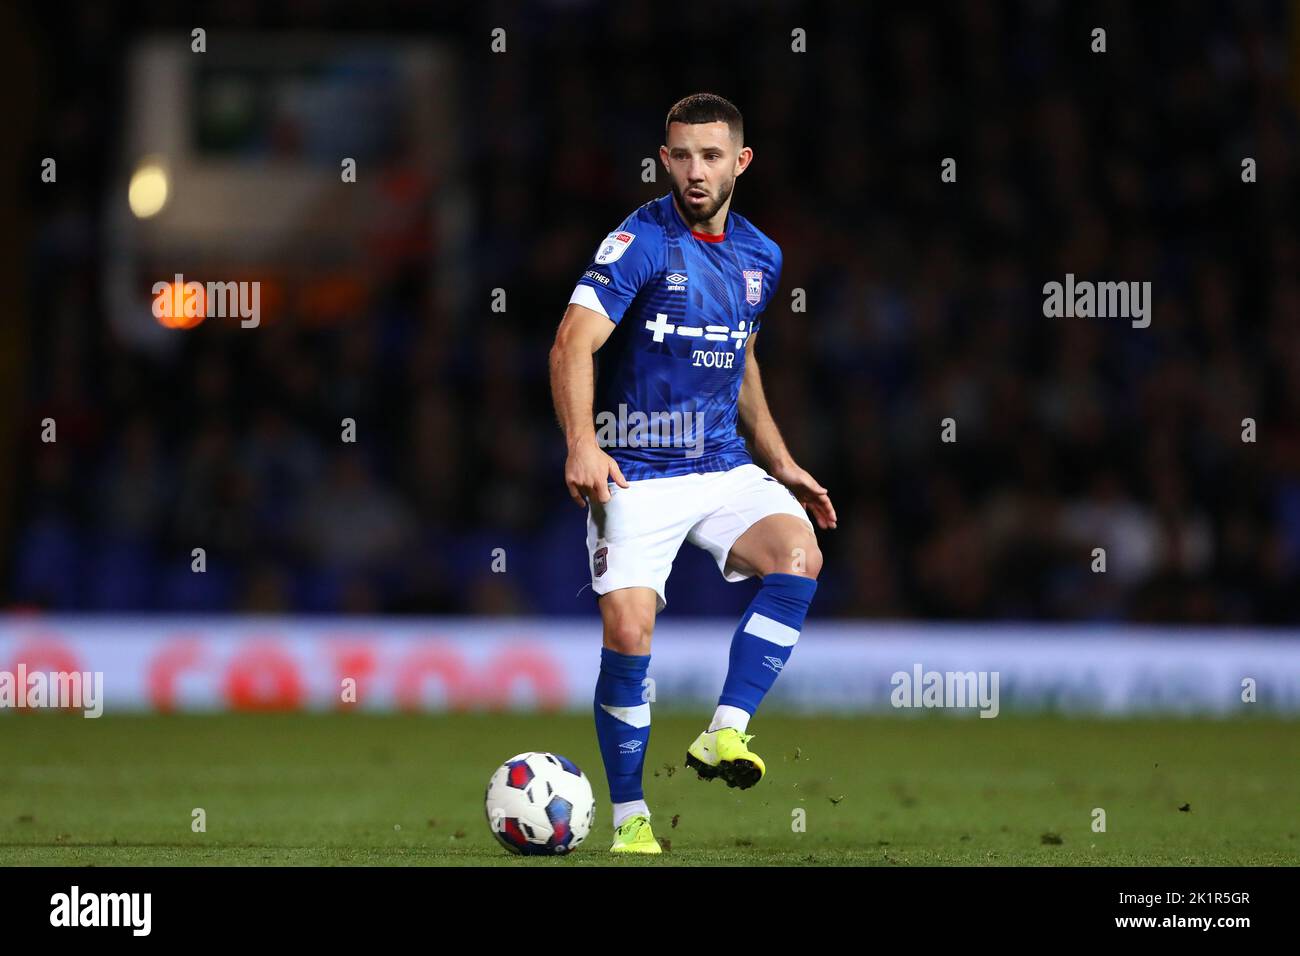 Conor Chaplin of Ipswich Town - Ipswich Town v Bristol Rovers, Sky Bet League One, Portman Road, Ipswich, UK - 13th September 2022  Editorial Use Only - DataCo restrictions apply Stock Photo